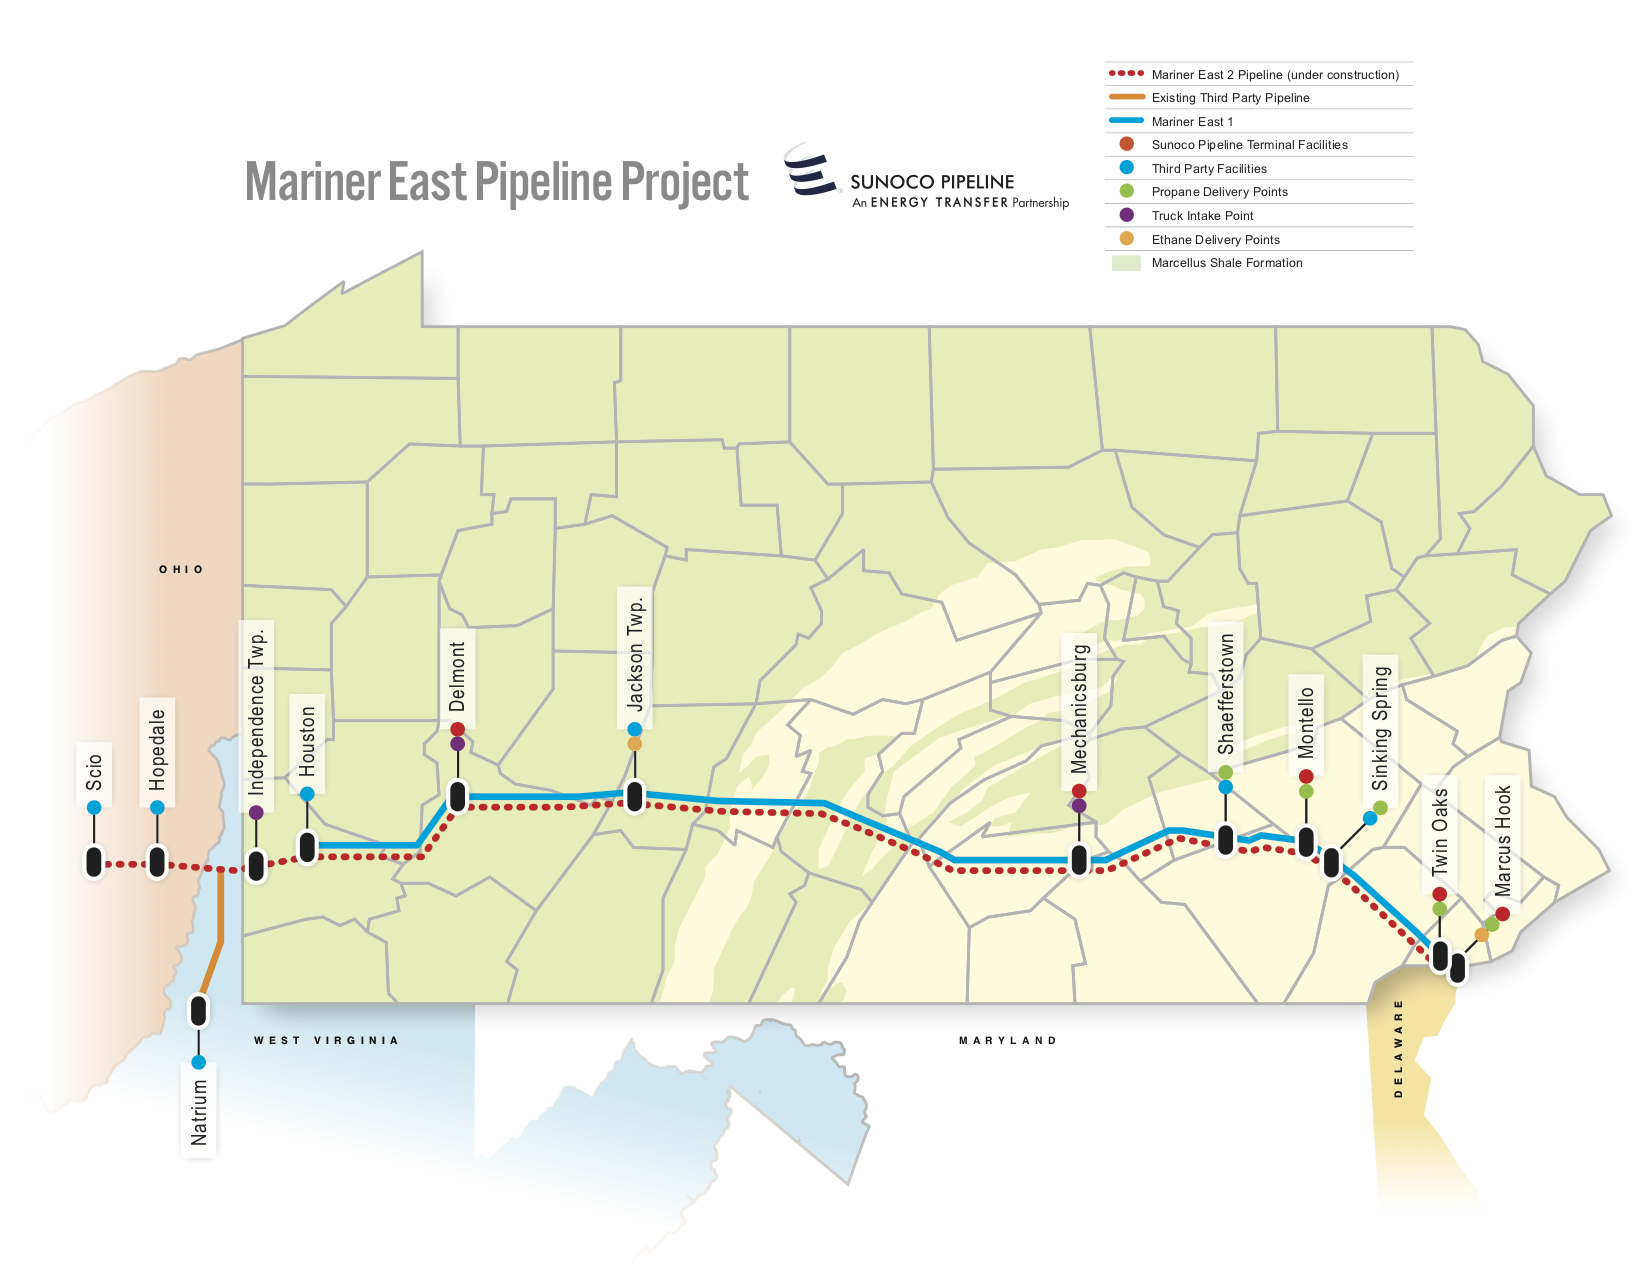 Mariner East pipeline project routes across Pennsylvania